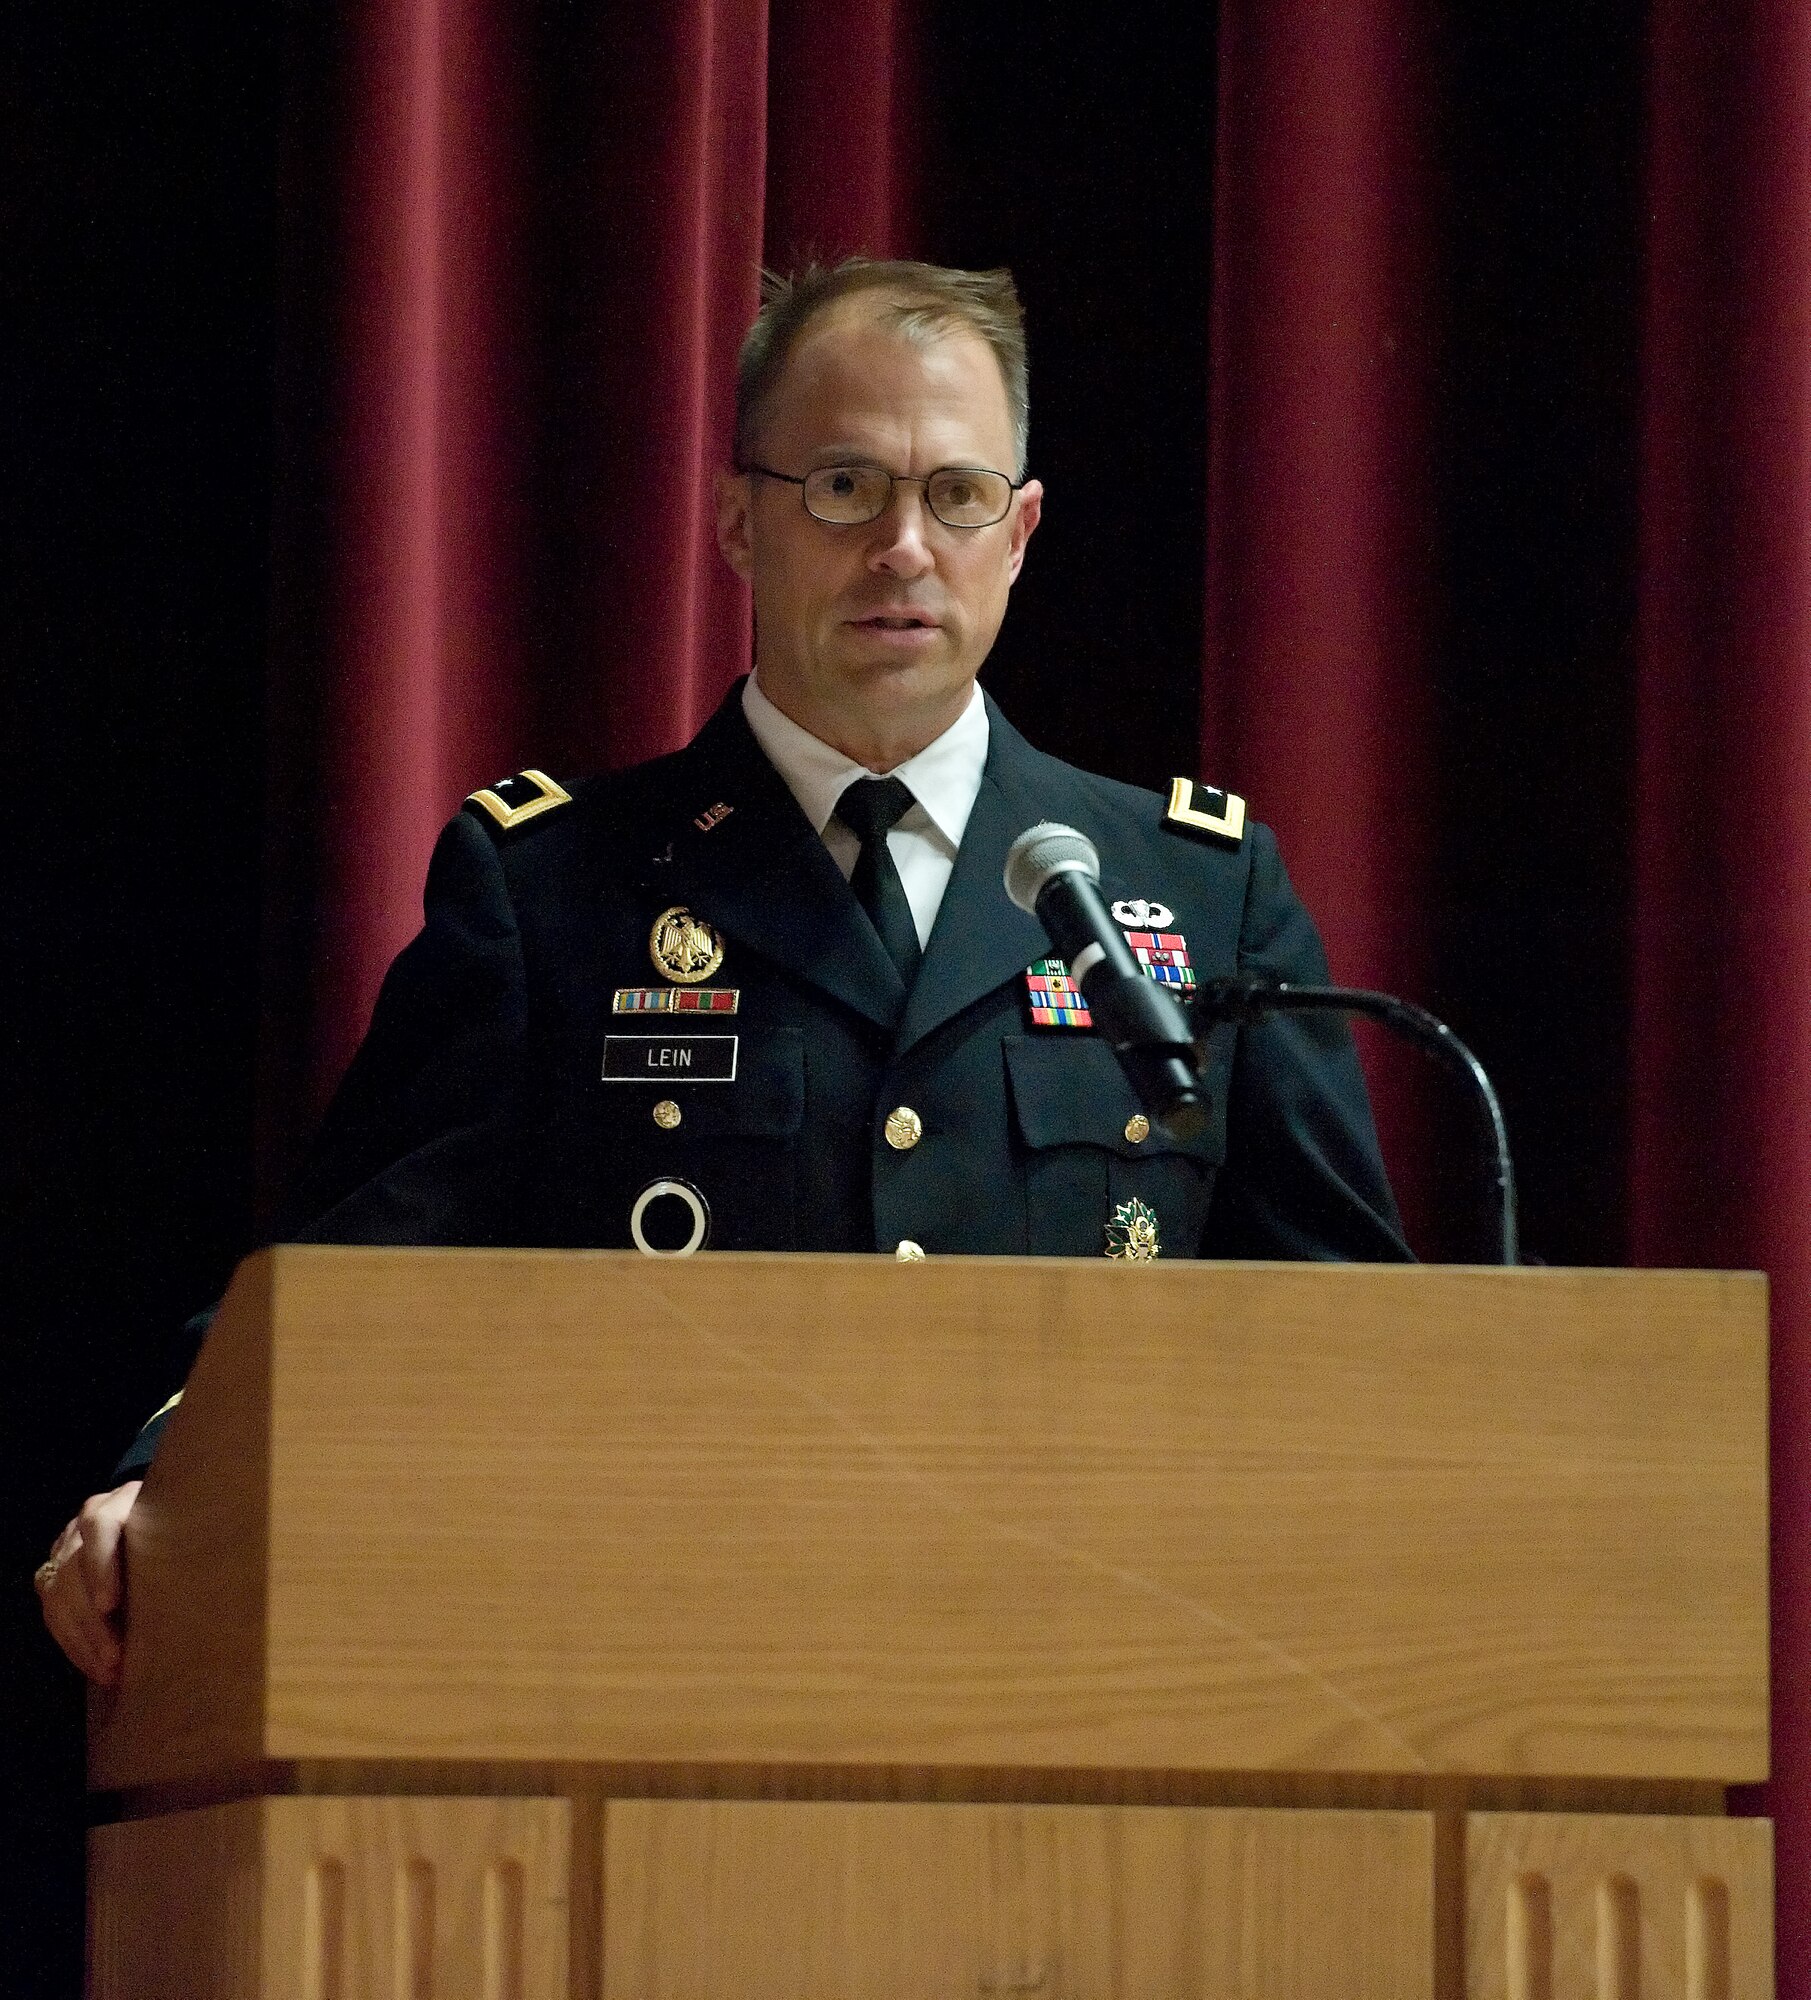 Maj. Gen. Brian Lein, commanding general, U.S. Army Medical Research and Material Command, Fort Detrick, Maryland, speaks to distinguished guests, Armed Forces Medical Examiner personnel and members of Team Dover in attendance during a transition and flag casing ceremony Aug. 31, 2015, at the Base Theater on Dover Air Force Base, Del. Approximately 250 military, civil service and contractor personnel assigned to AFMES will now fall under the Department of Defense as a result of the transition. (U.S. Air Force photo/Roland Balik)